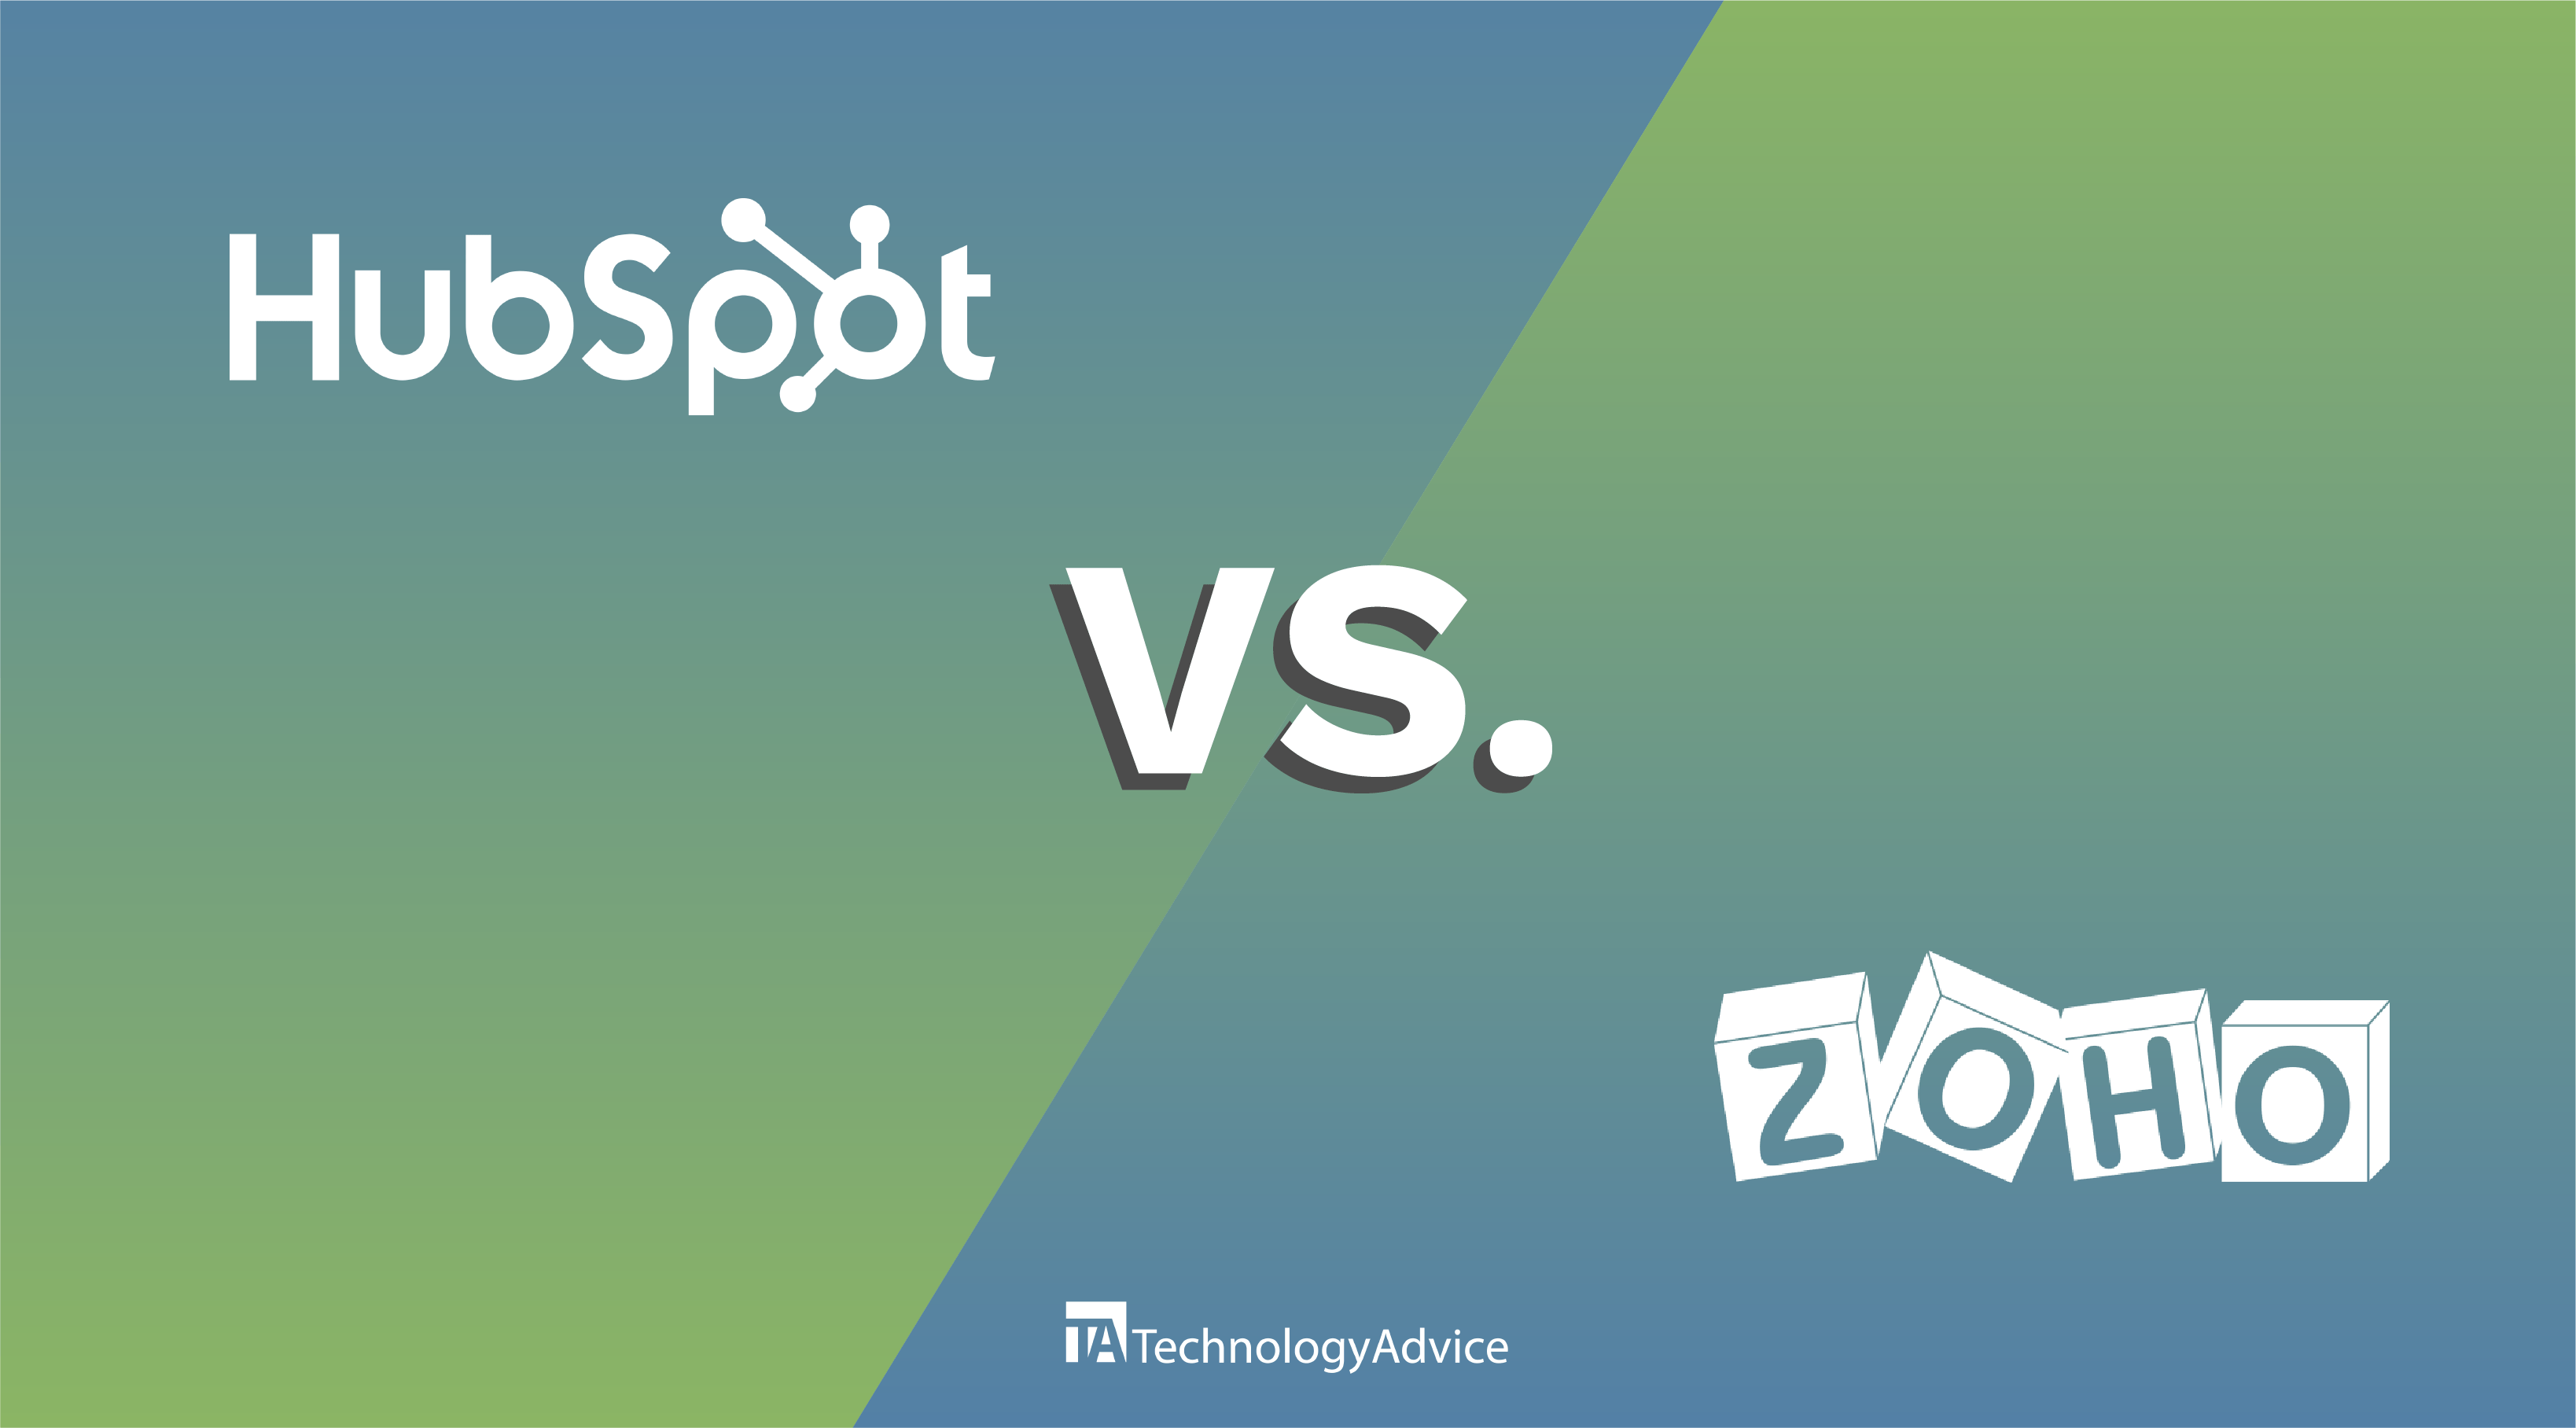 Illustration of the HubSpot and Zoho logos with "versus" in between them.